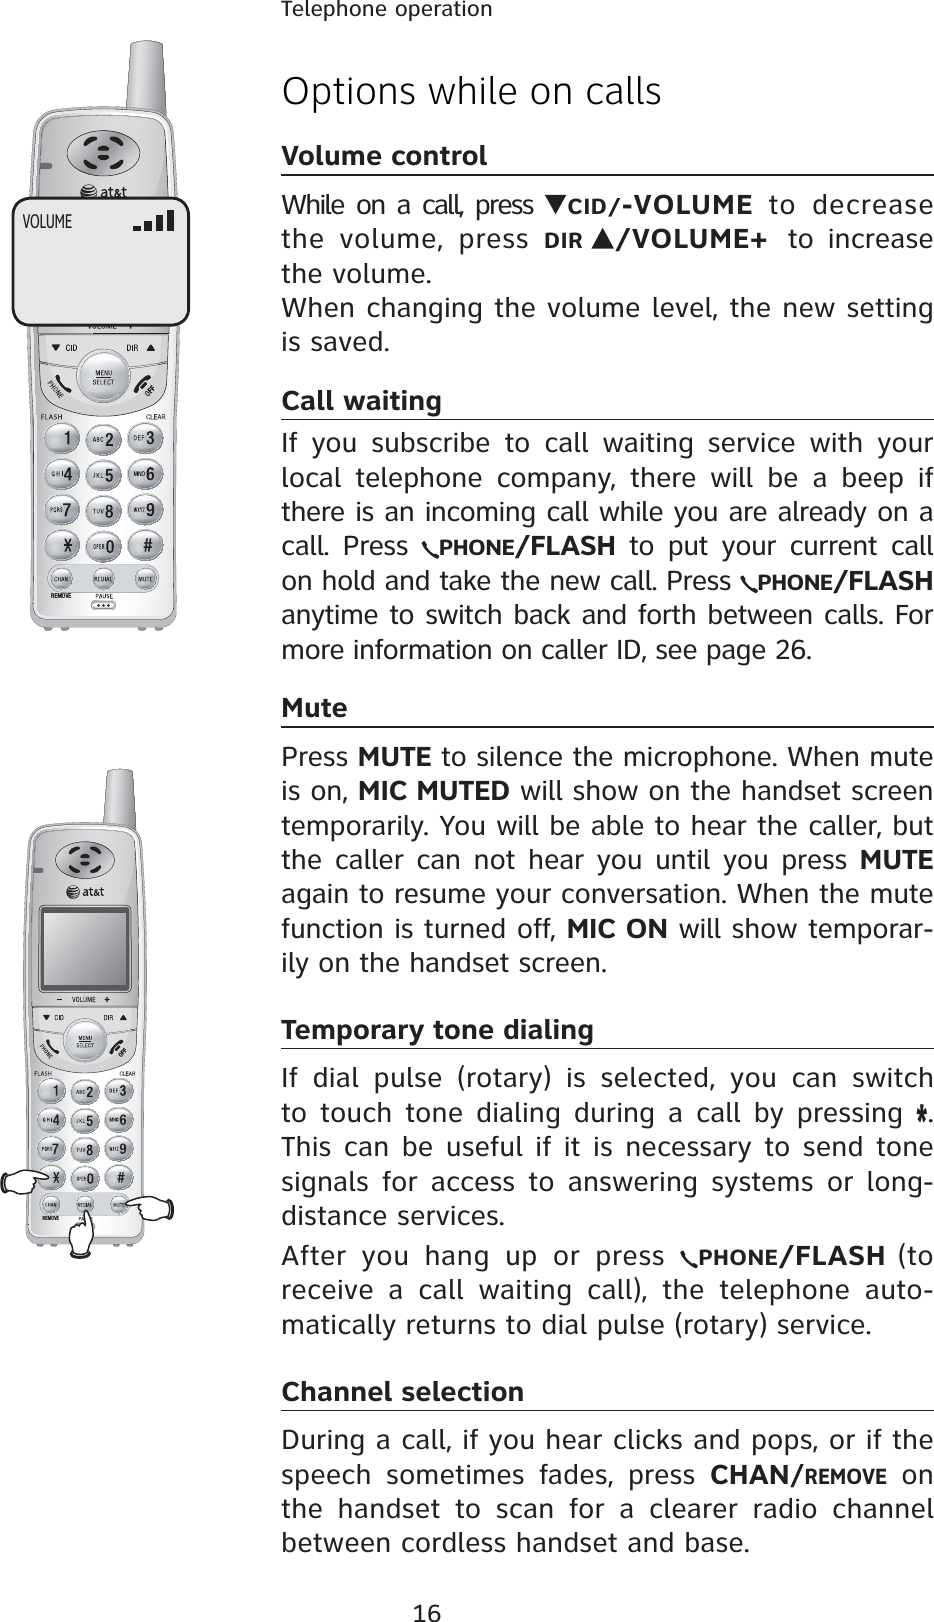 16Telephone operationREMOVEREMOVEOptions while on callsVolume controlWhile on a call, press  CID/-VOLUME to decrease the volume, press DIR /VOLUME+ to increase the volume.When changing the volume level, the new setting is saved. Call waitingIf you subscribe to call waiting service with your local telephone company, there will be a beep if there is an incoming call while you are already on a call. Press  PHONE/FLASH to put your current call on hold and take the new call. Press  PHONE/FLASHanytime to switch back and forth between calls. For more information on caller ID, see page 26.MutePress MUTE to silence the microphone. When mute is on, MIC MUTED will show on the handset screen temporarily. You will be able to hear the caller, but the caller can not hear you until you press MUTEagain to resume your conversation. When the mute function is turned off, MIC ON will show temporar-ily on the handset screen.Temporary tone dialingIf dial pulse (rotary) is selected, you can switch to touch tone dialing during a call by pressing *.This can be useful if it is necessary to send tone signals for access to answering systems or long-distance services.After you hang up or press  PHONE/FLASH (to receive a call waiting call), the telephone auto-matically returns to dial pulse (rotary) service.Channel selectionDuring a call, if you hear clicks and pops, or if the speech sometimes fades, press CHAN/REMOVE on the handset to scan for a clearer radio channel between cordless handset and base.VOLUME